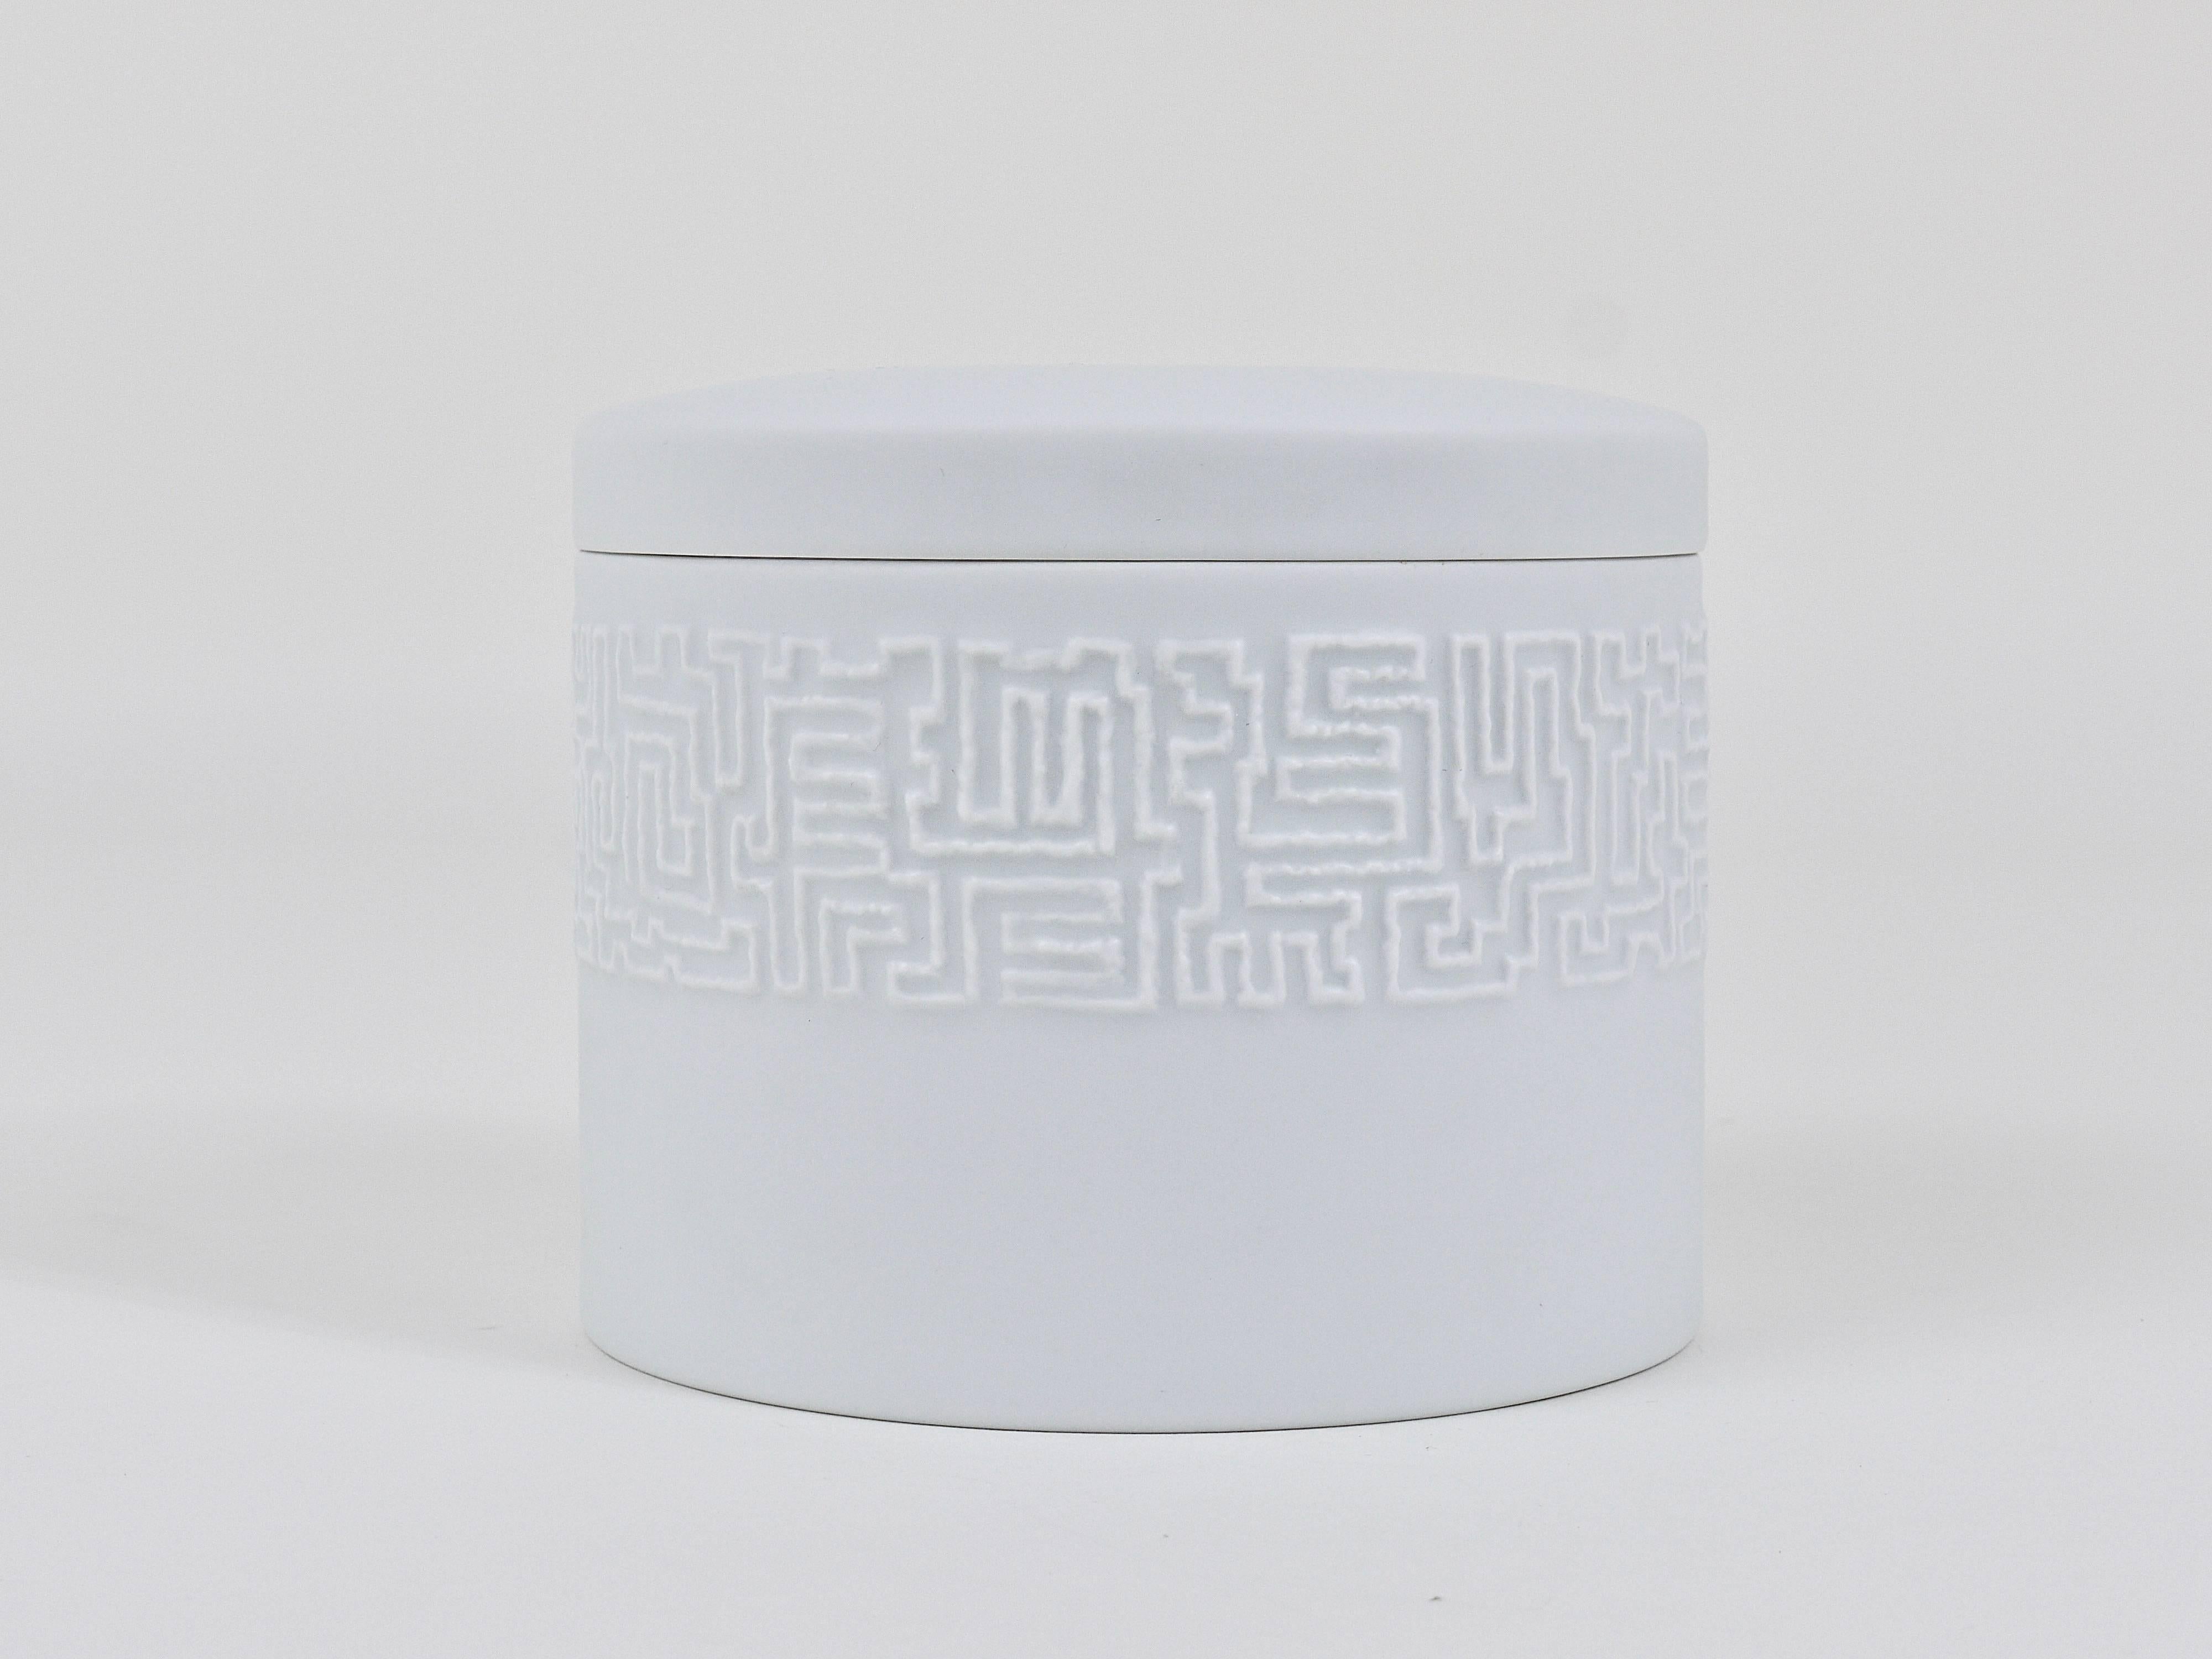 German Cuno Fischer Rosenthal Studio-Linie White Relief Op Art Bowl with Lid, 1960s For Sale